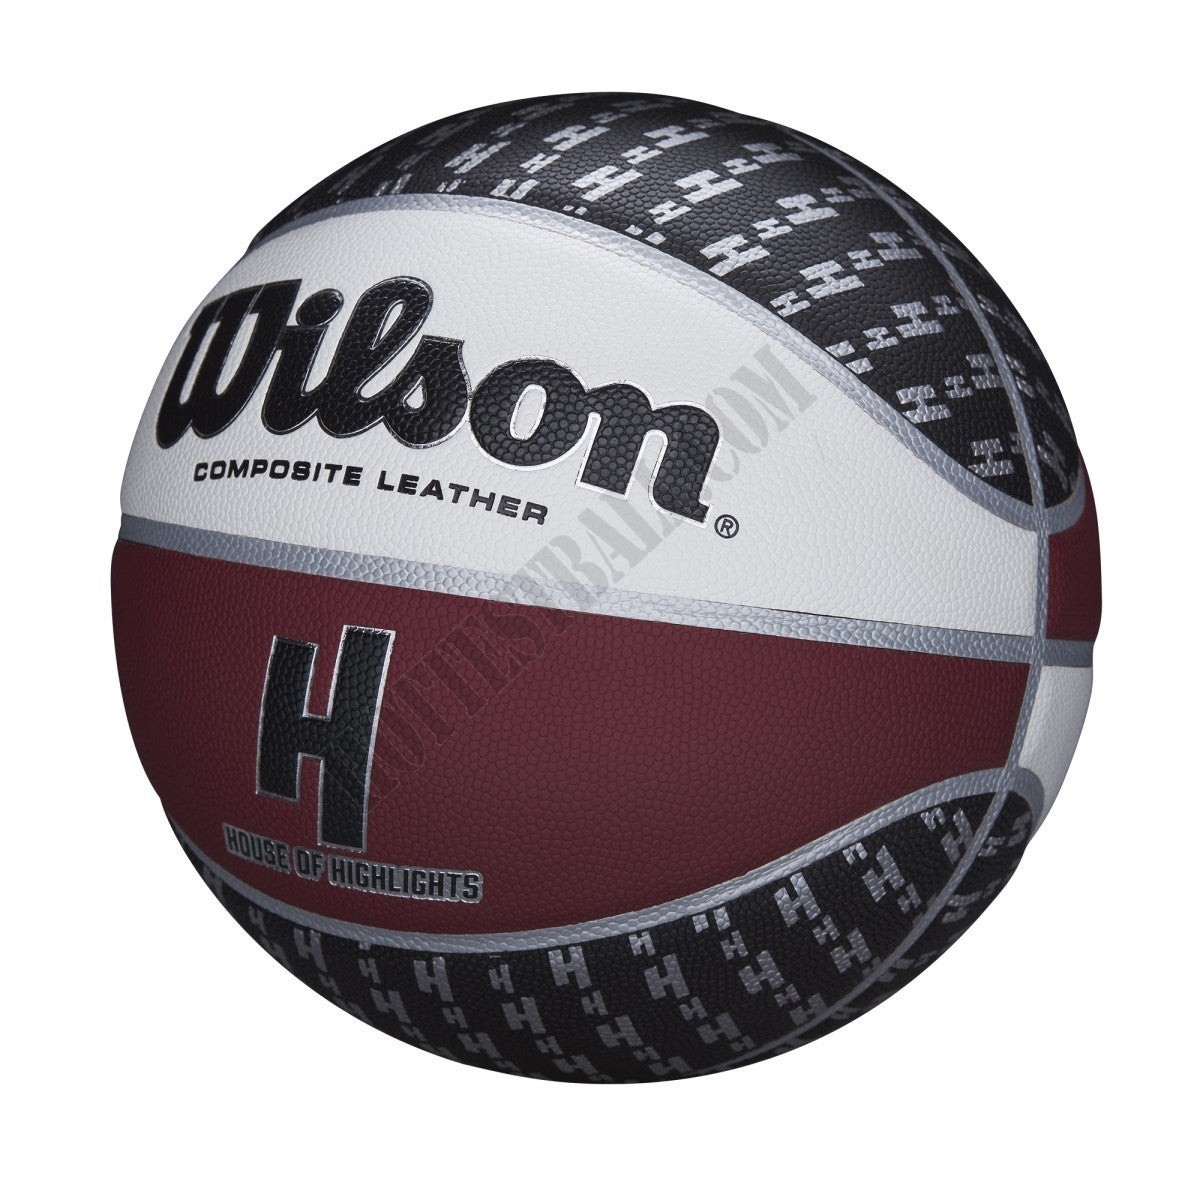 House of Highlights "Holiday Special" Basketball - Wilson Discount Store - -2